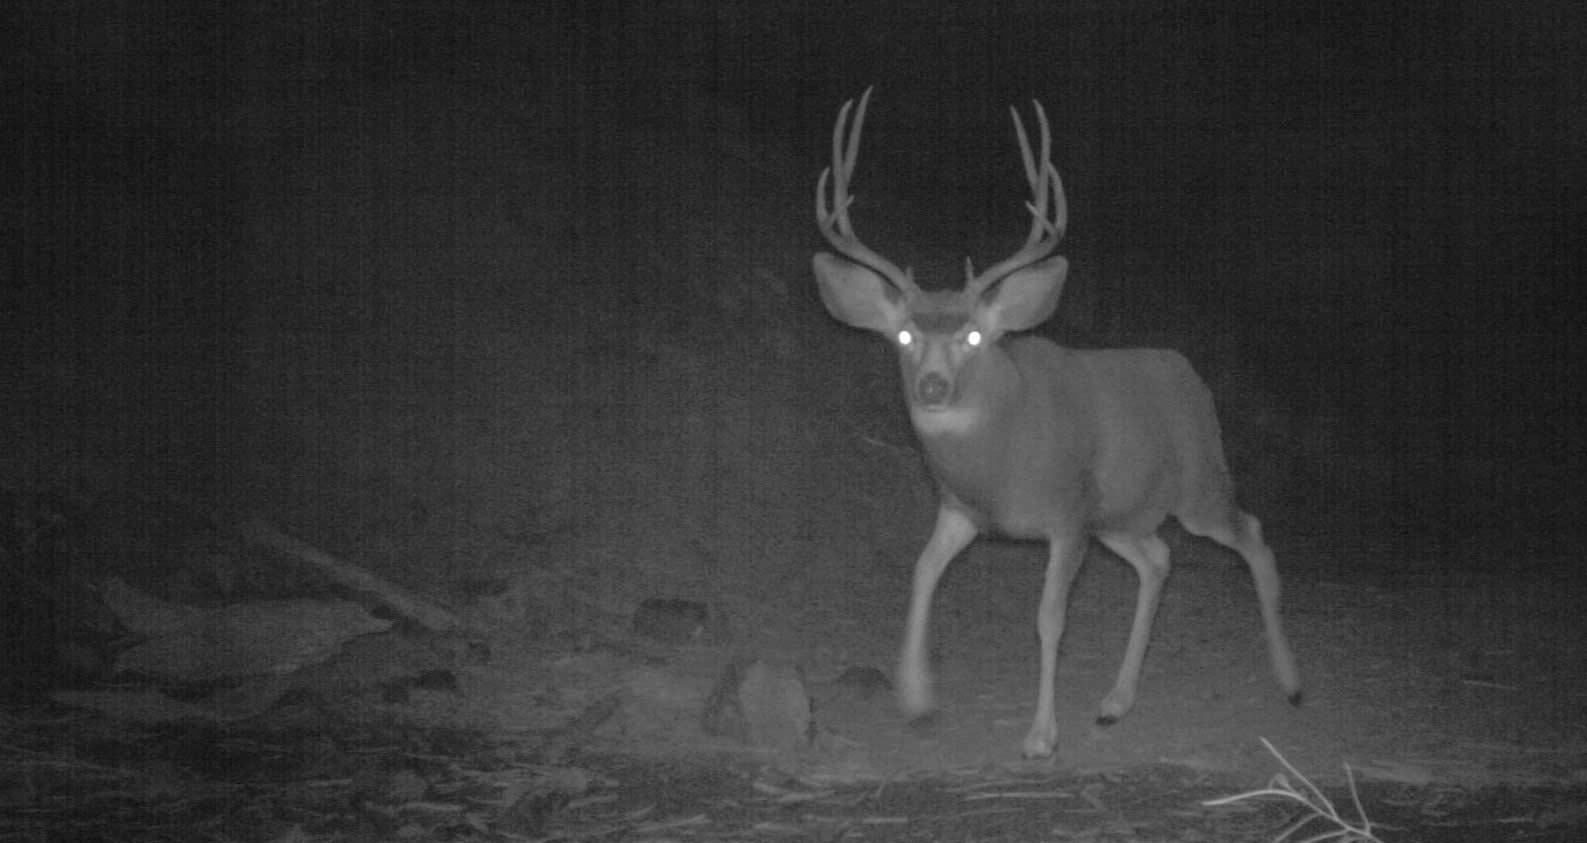 Deer at night with reflecting eyes